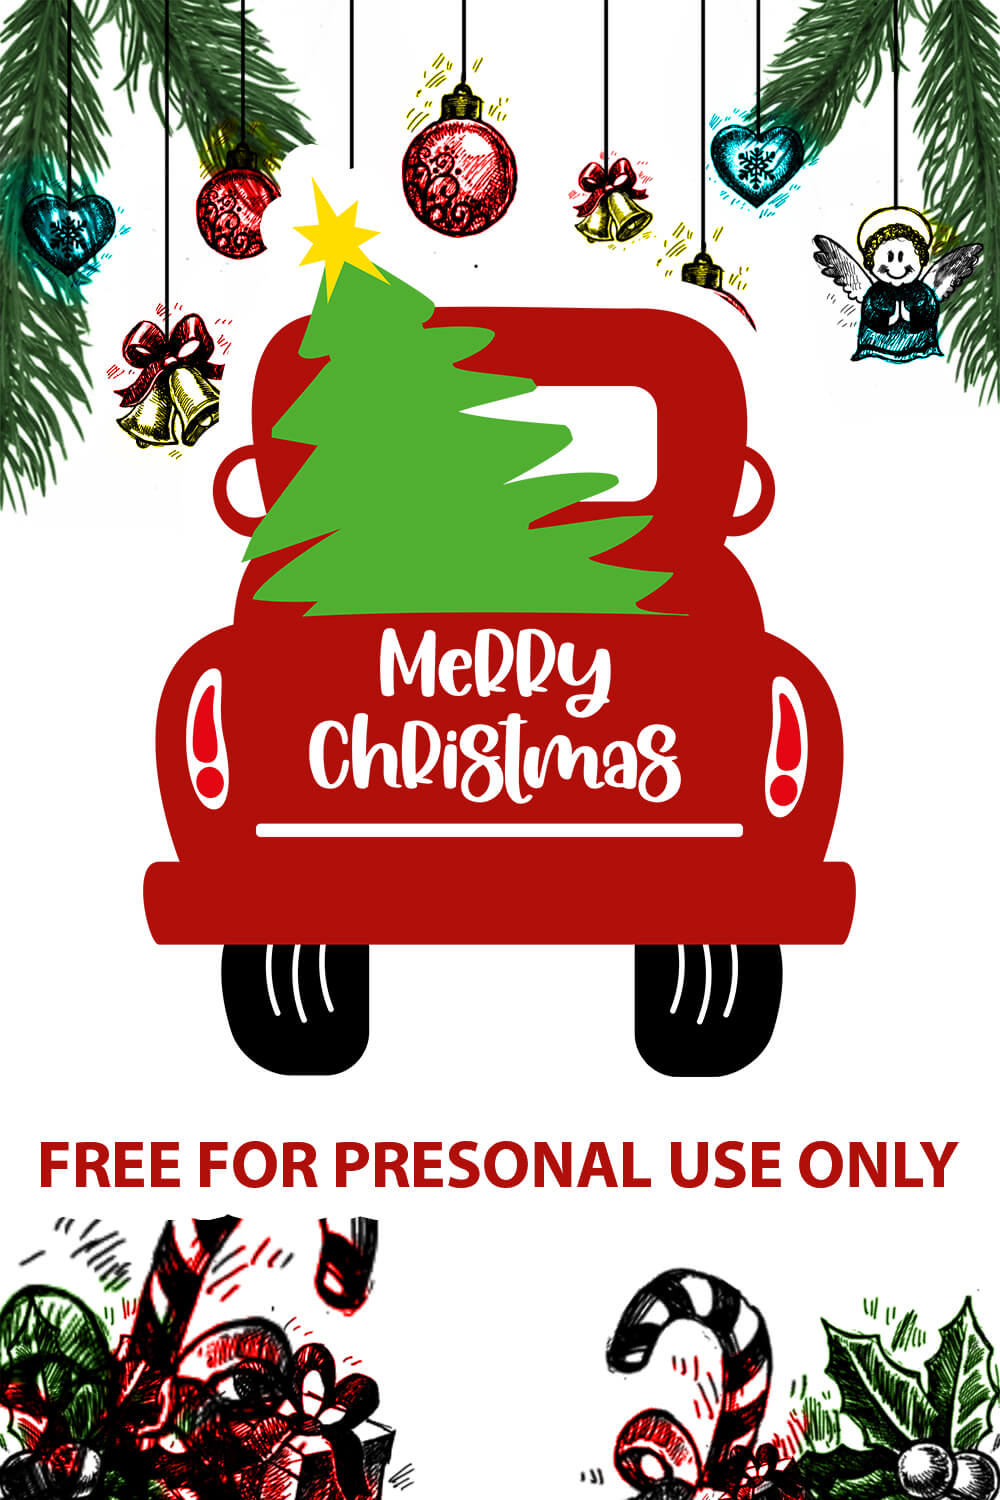 Merry Christmas pick up truck tree free SVG files pinterest image.